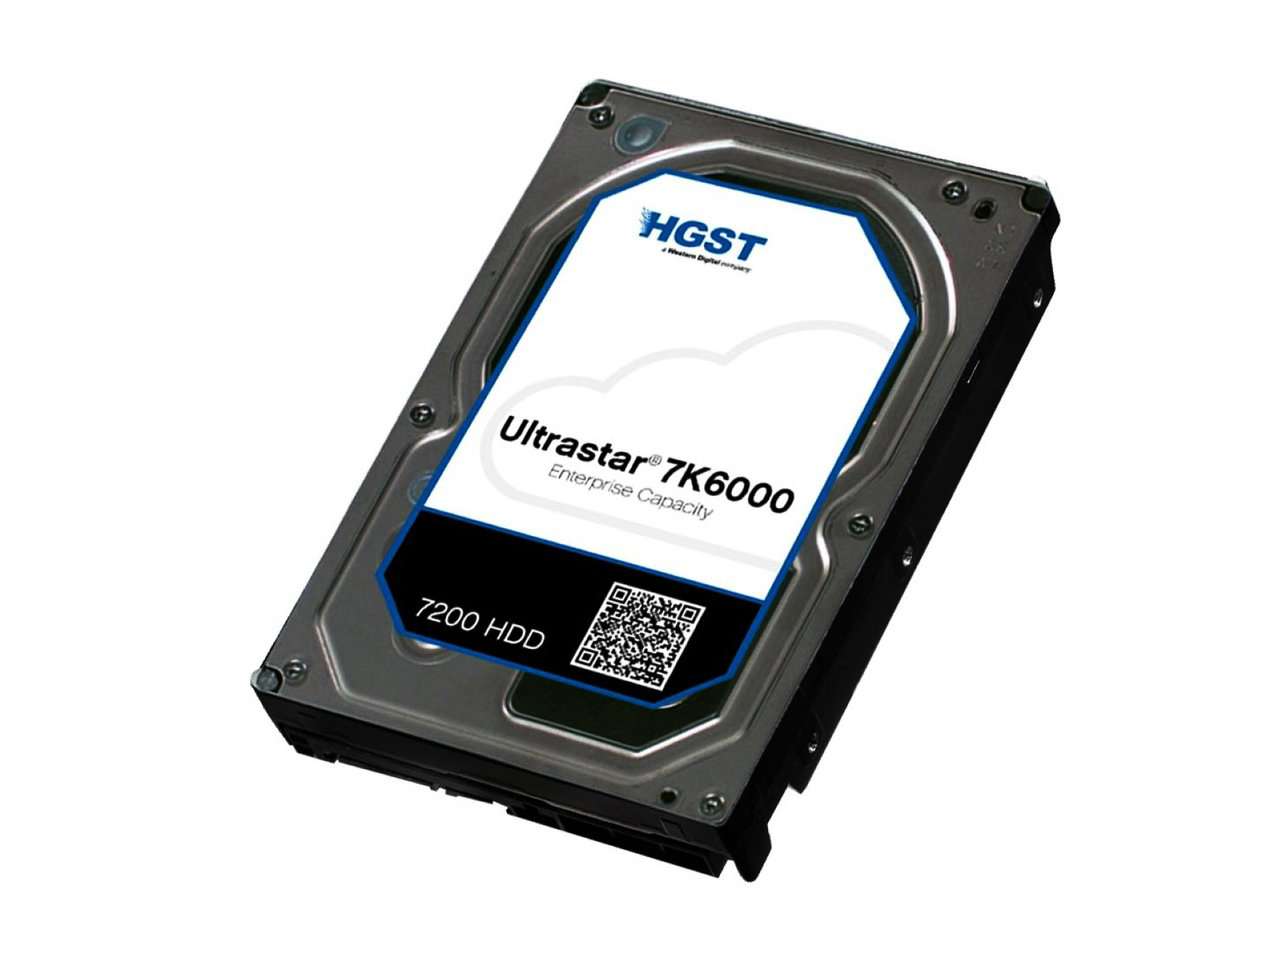 HGST Ultrastar 7K6000 0F22798  HUS726020AL4210 2TB 7.2K RPM SAS 12Gb/s 4Kn 128MB Cache 3.5" ISE Manufacturer Recertified HDD